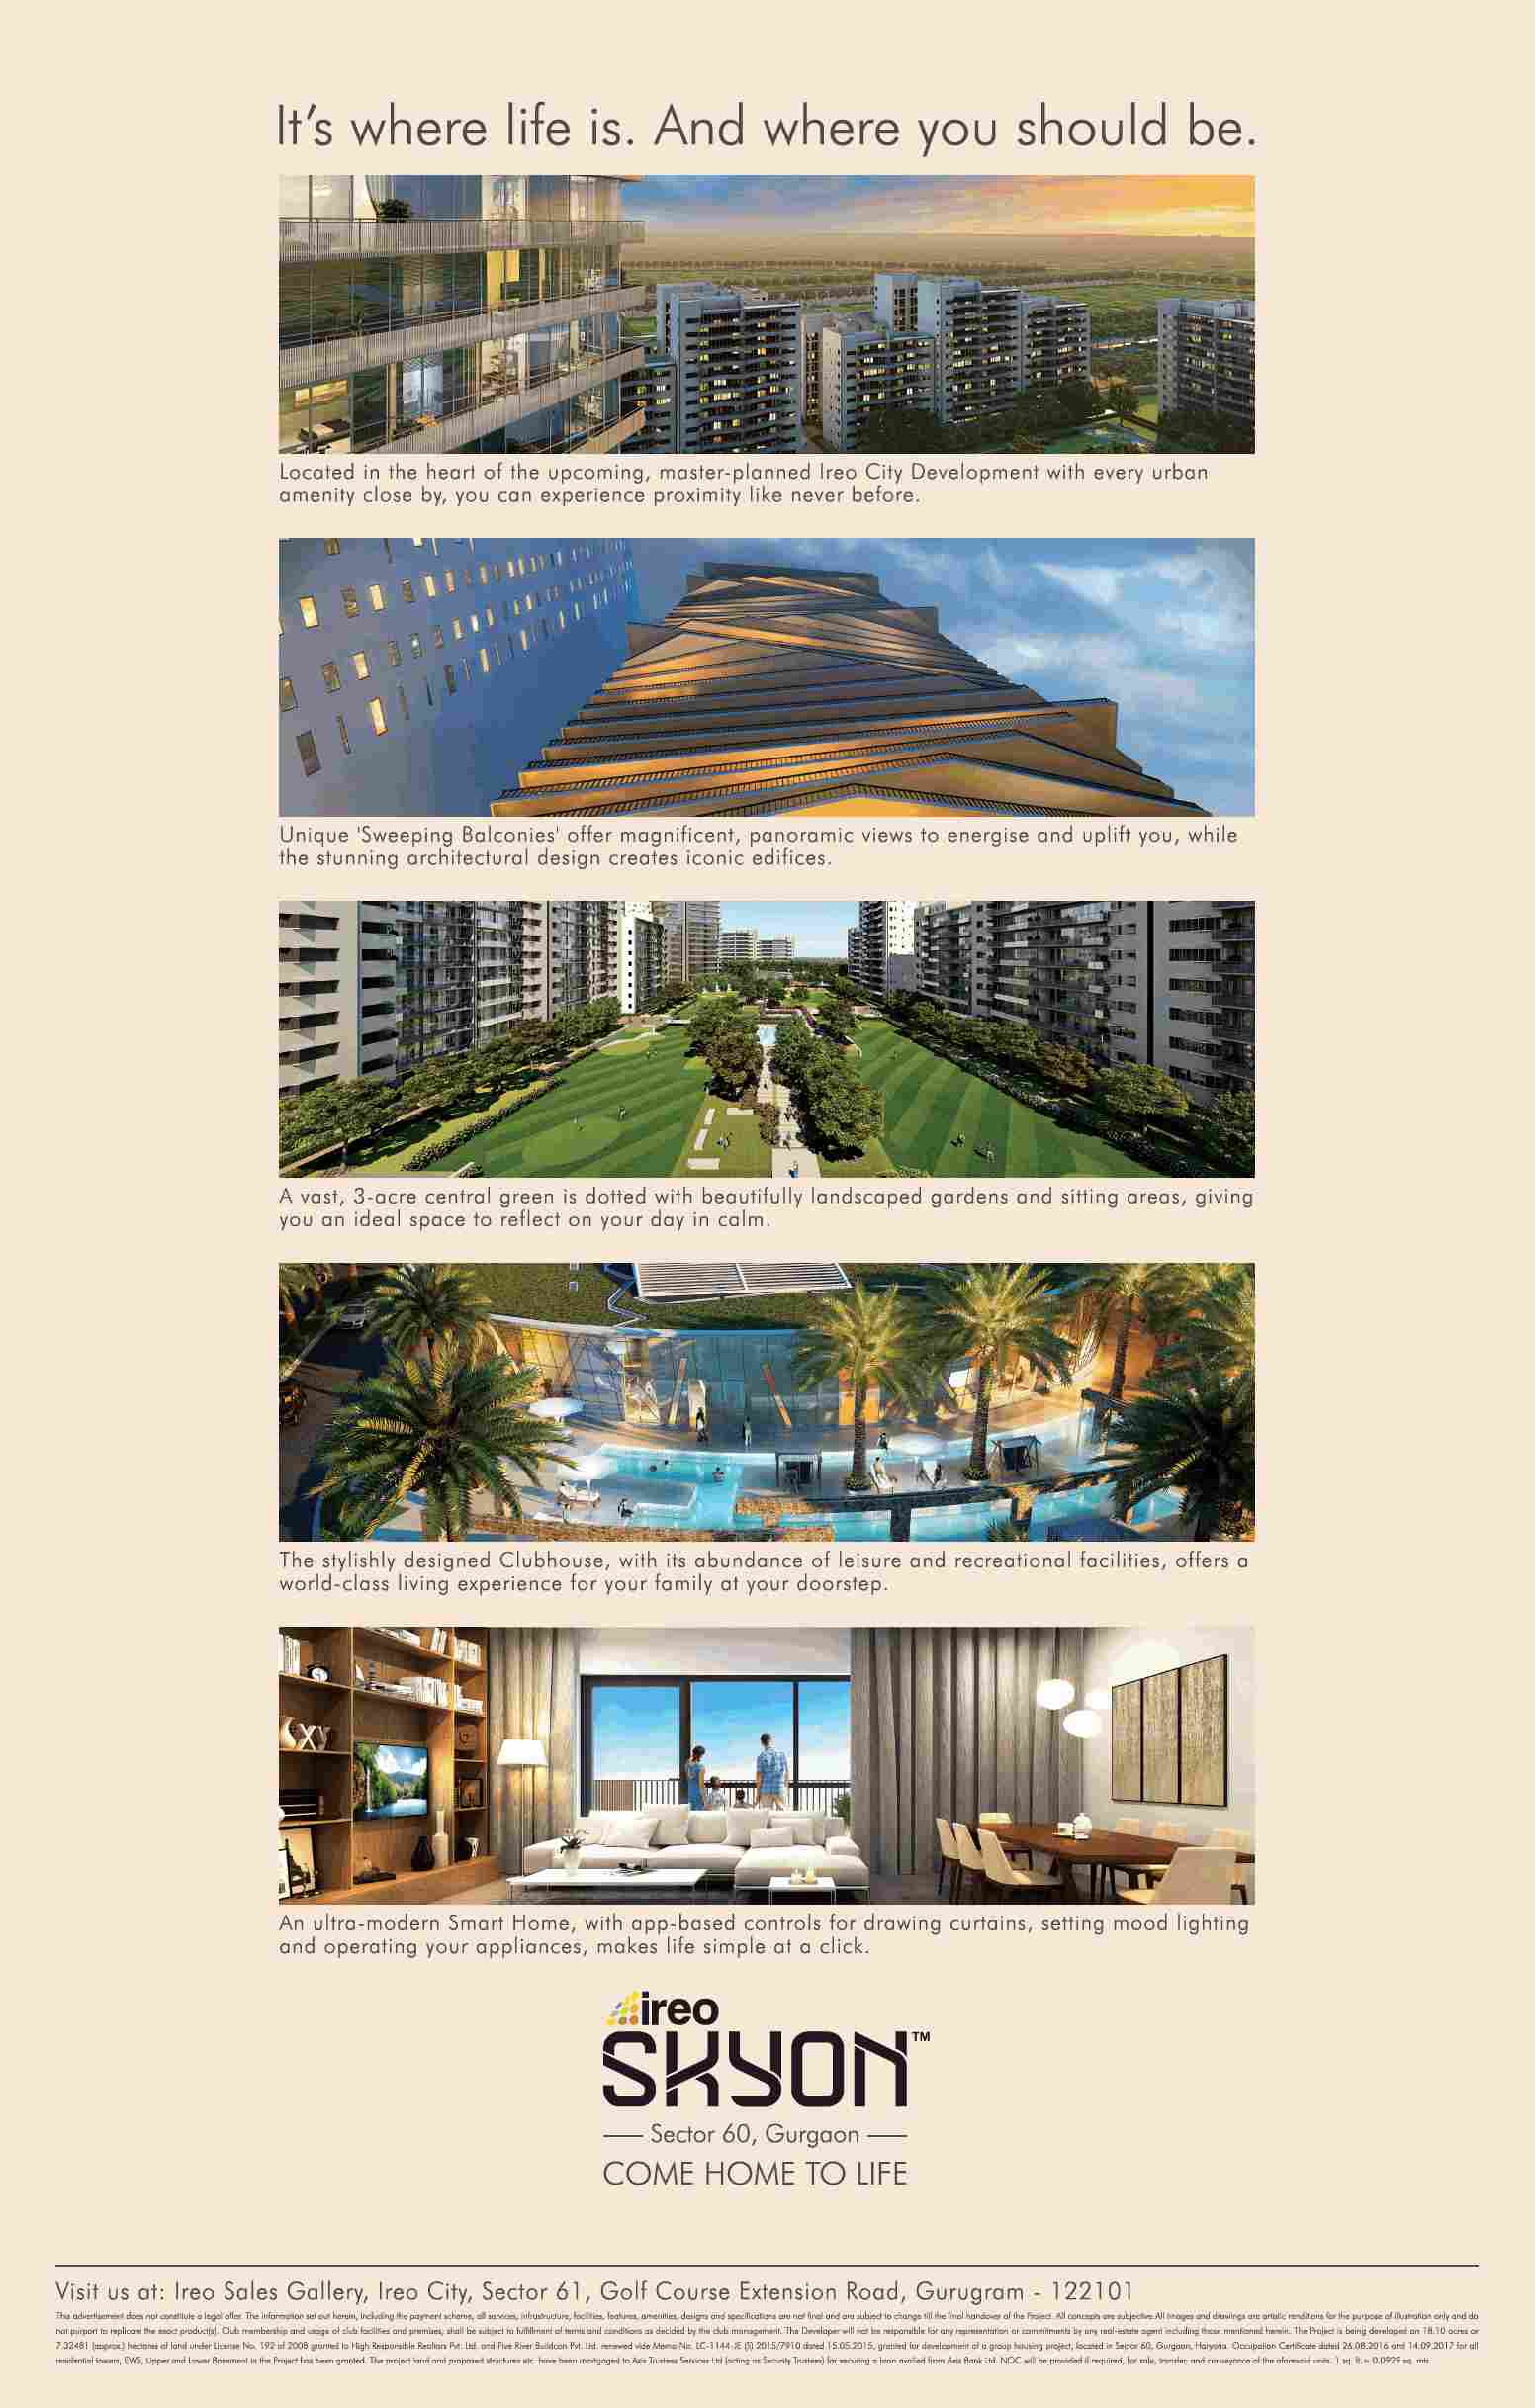 Experience panoramic views to energise and uplift yourself at Ireo Skyon in Gurgaon